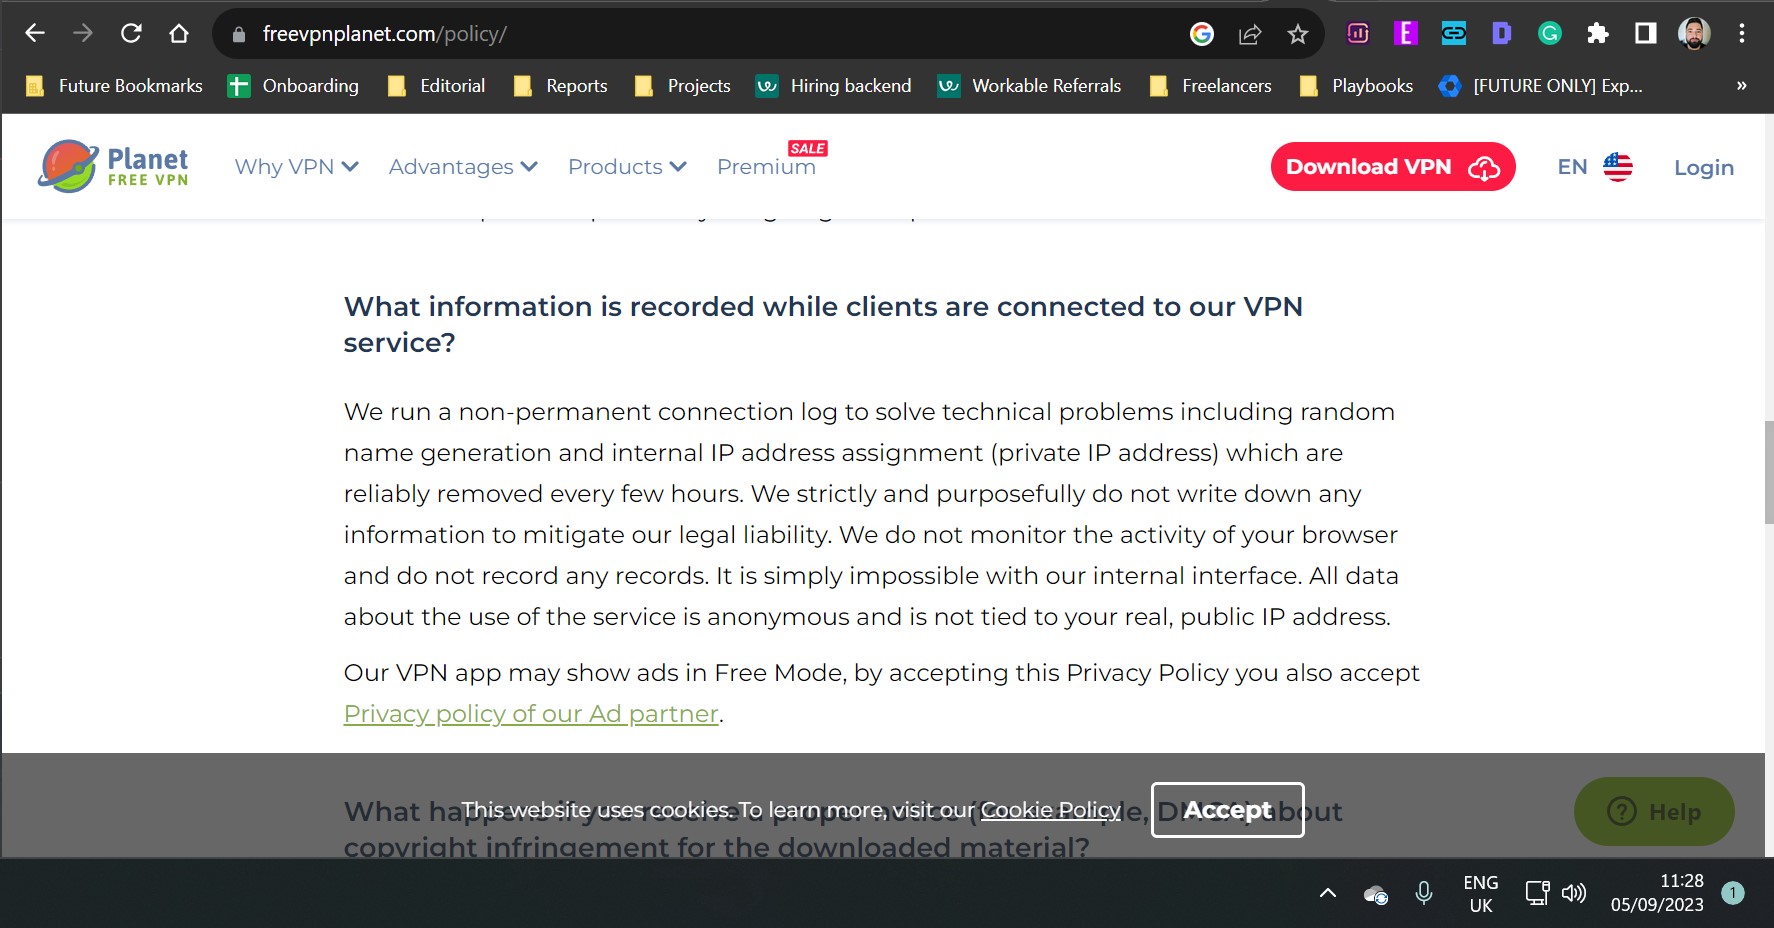 Screenshot of Free VPN Planet Privacy Policy as of 05 September, 2023